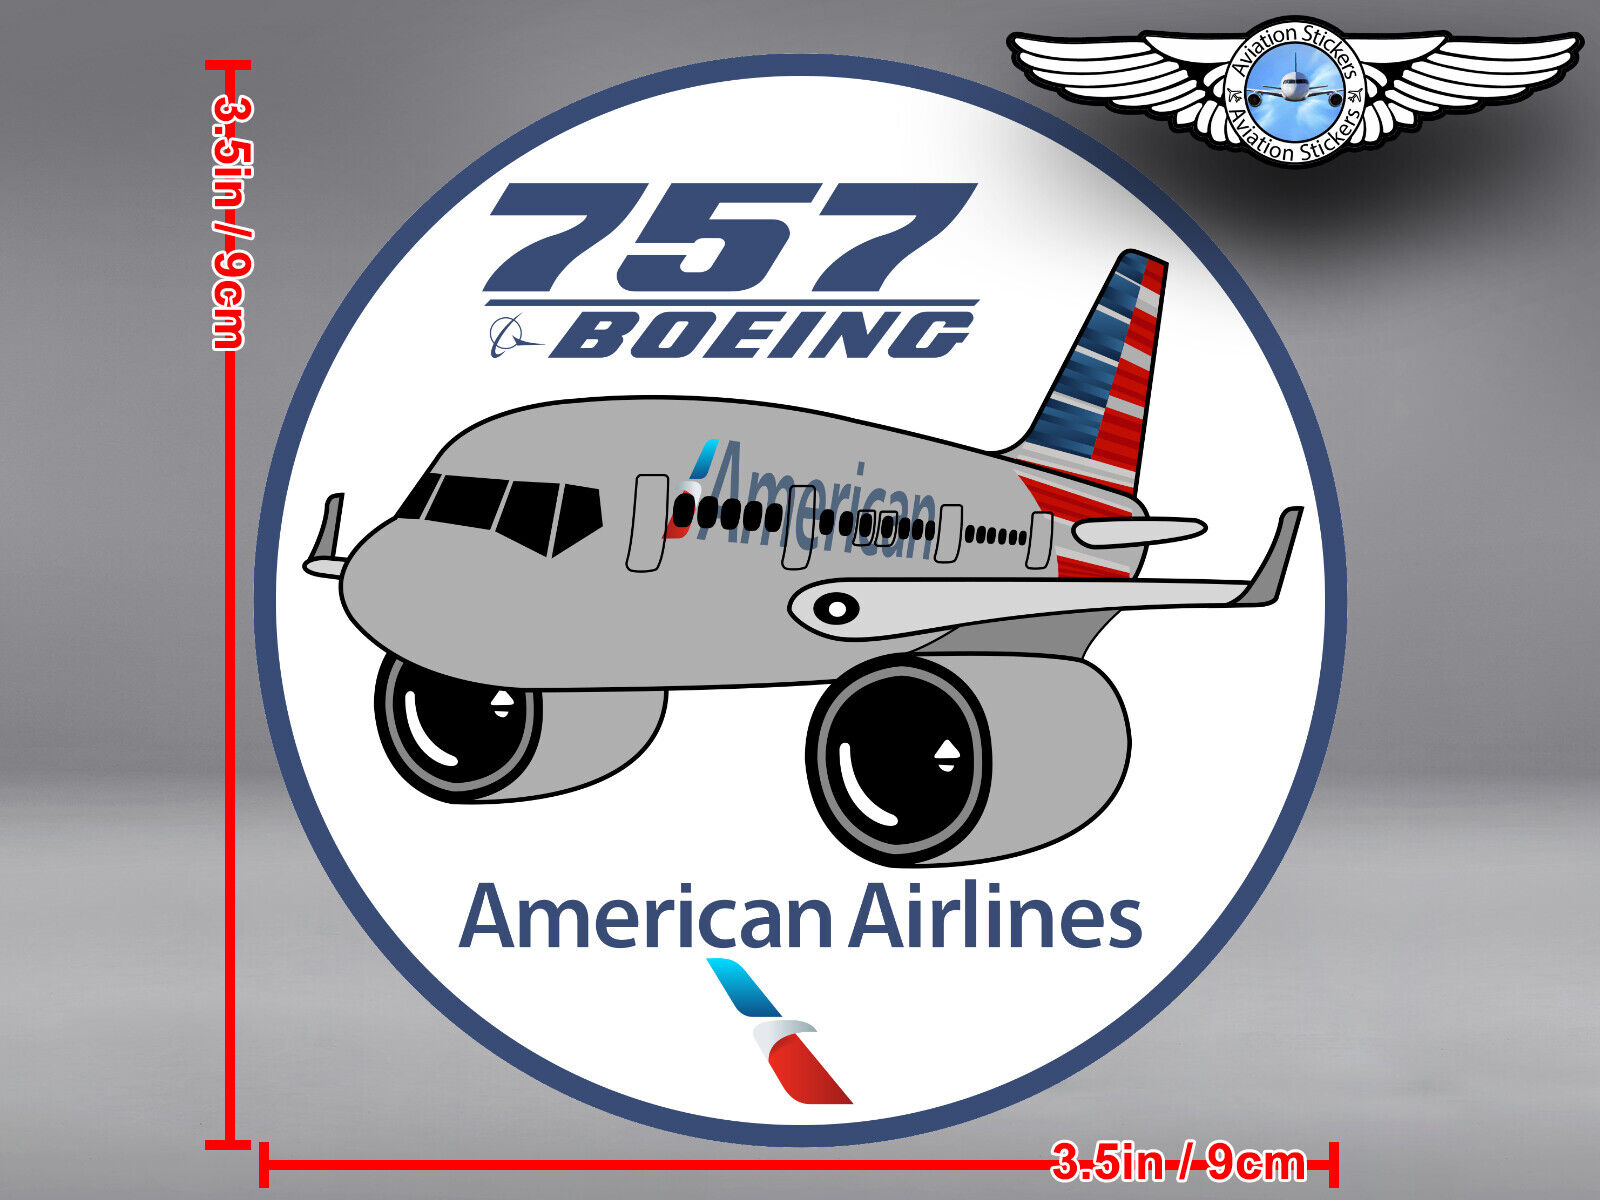 AMERICAN AIRLINES AA BOEING B757 B 757 PUDGY DECAL / STICKER